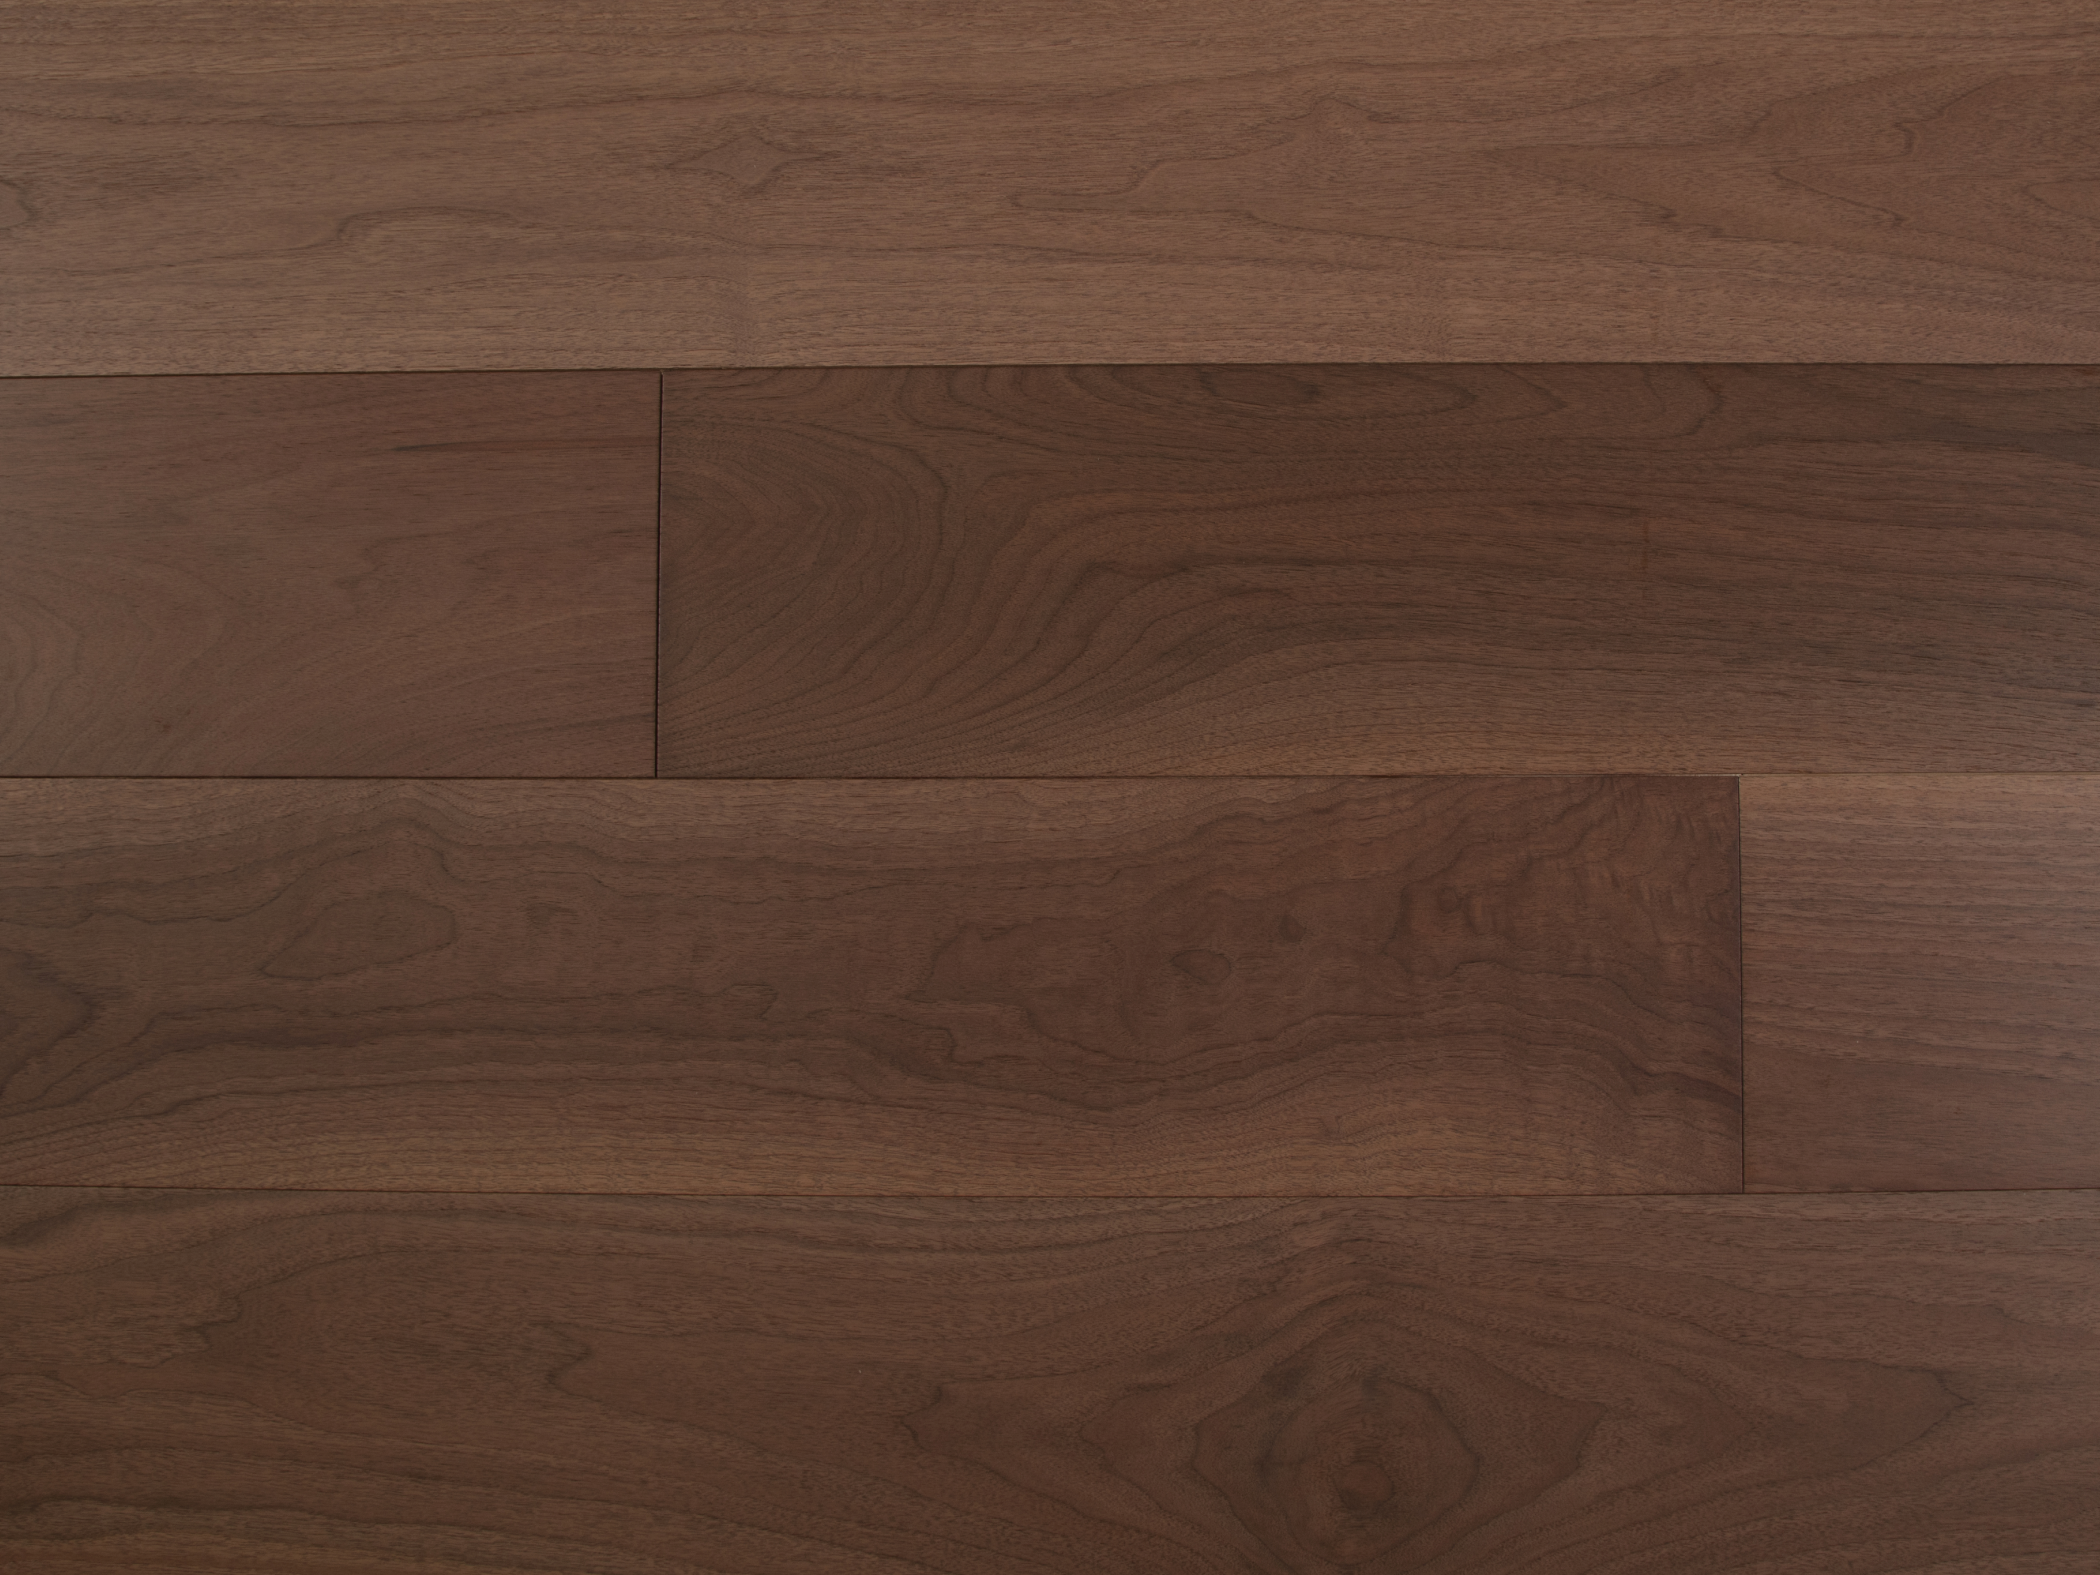 Vidar American Black Walnut Naked Walnut 3/4" x 11 2/3" Wire Brushed Character (ABCD)